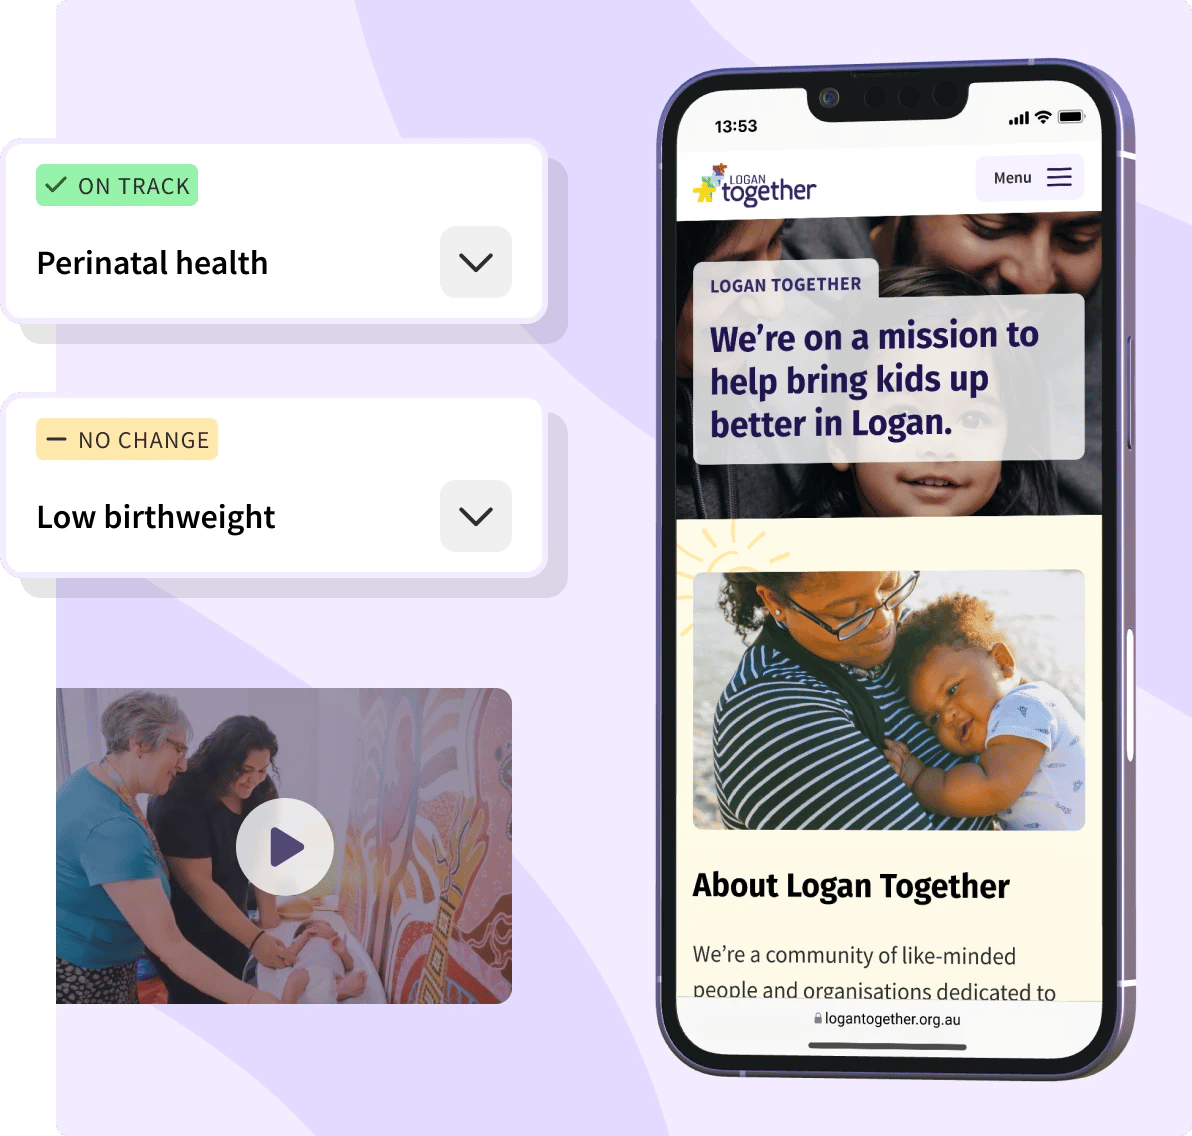 Mockup of Logan Together's homepage on an iPhone.